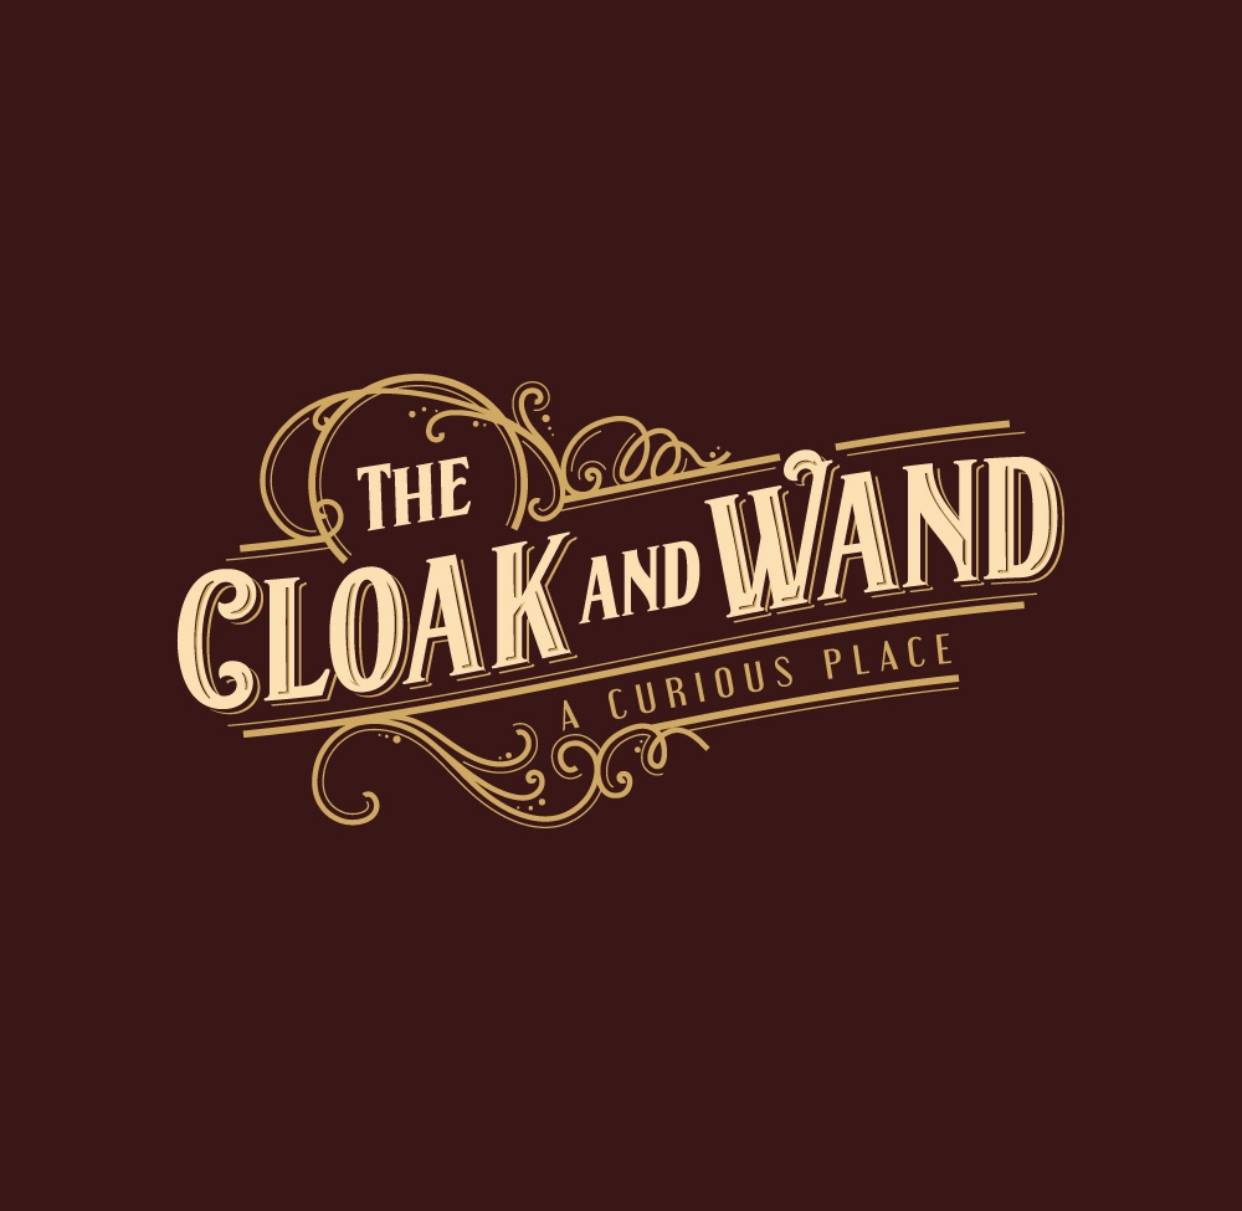 List 91+ Images the cloak and wand photos Stunning